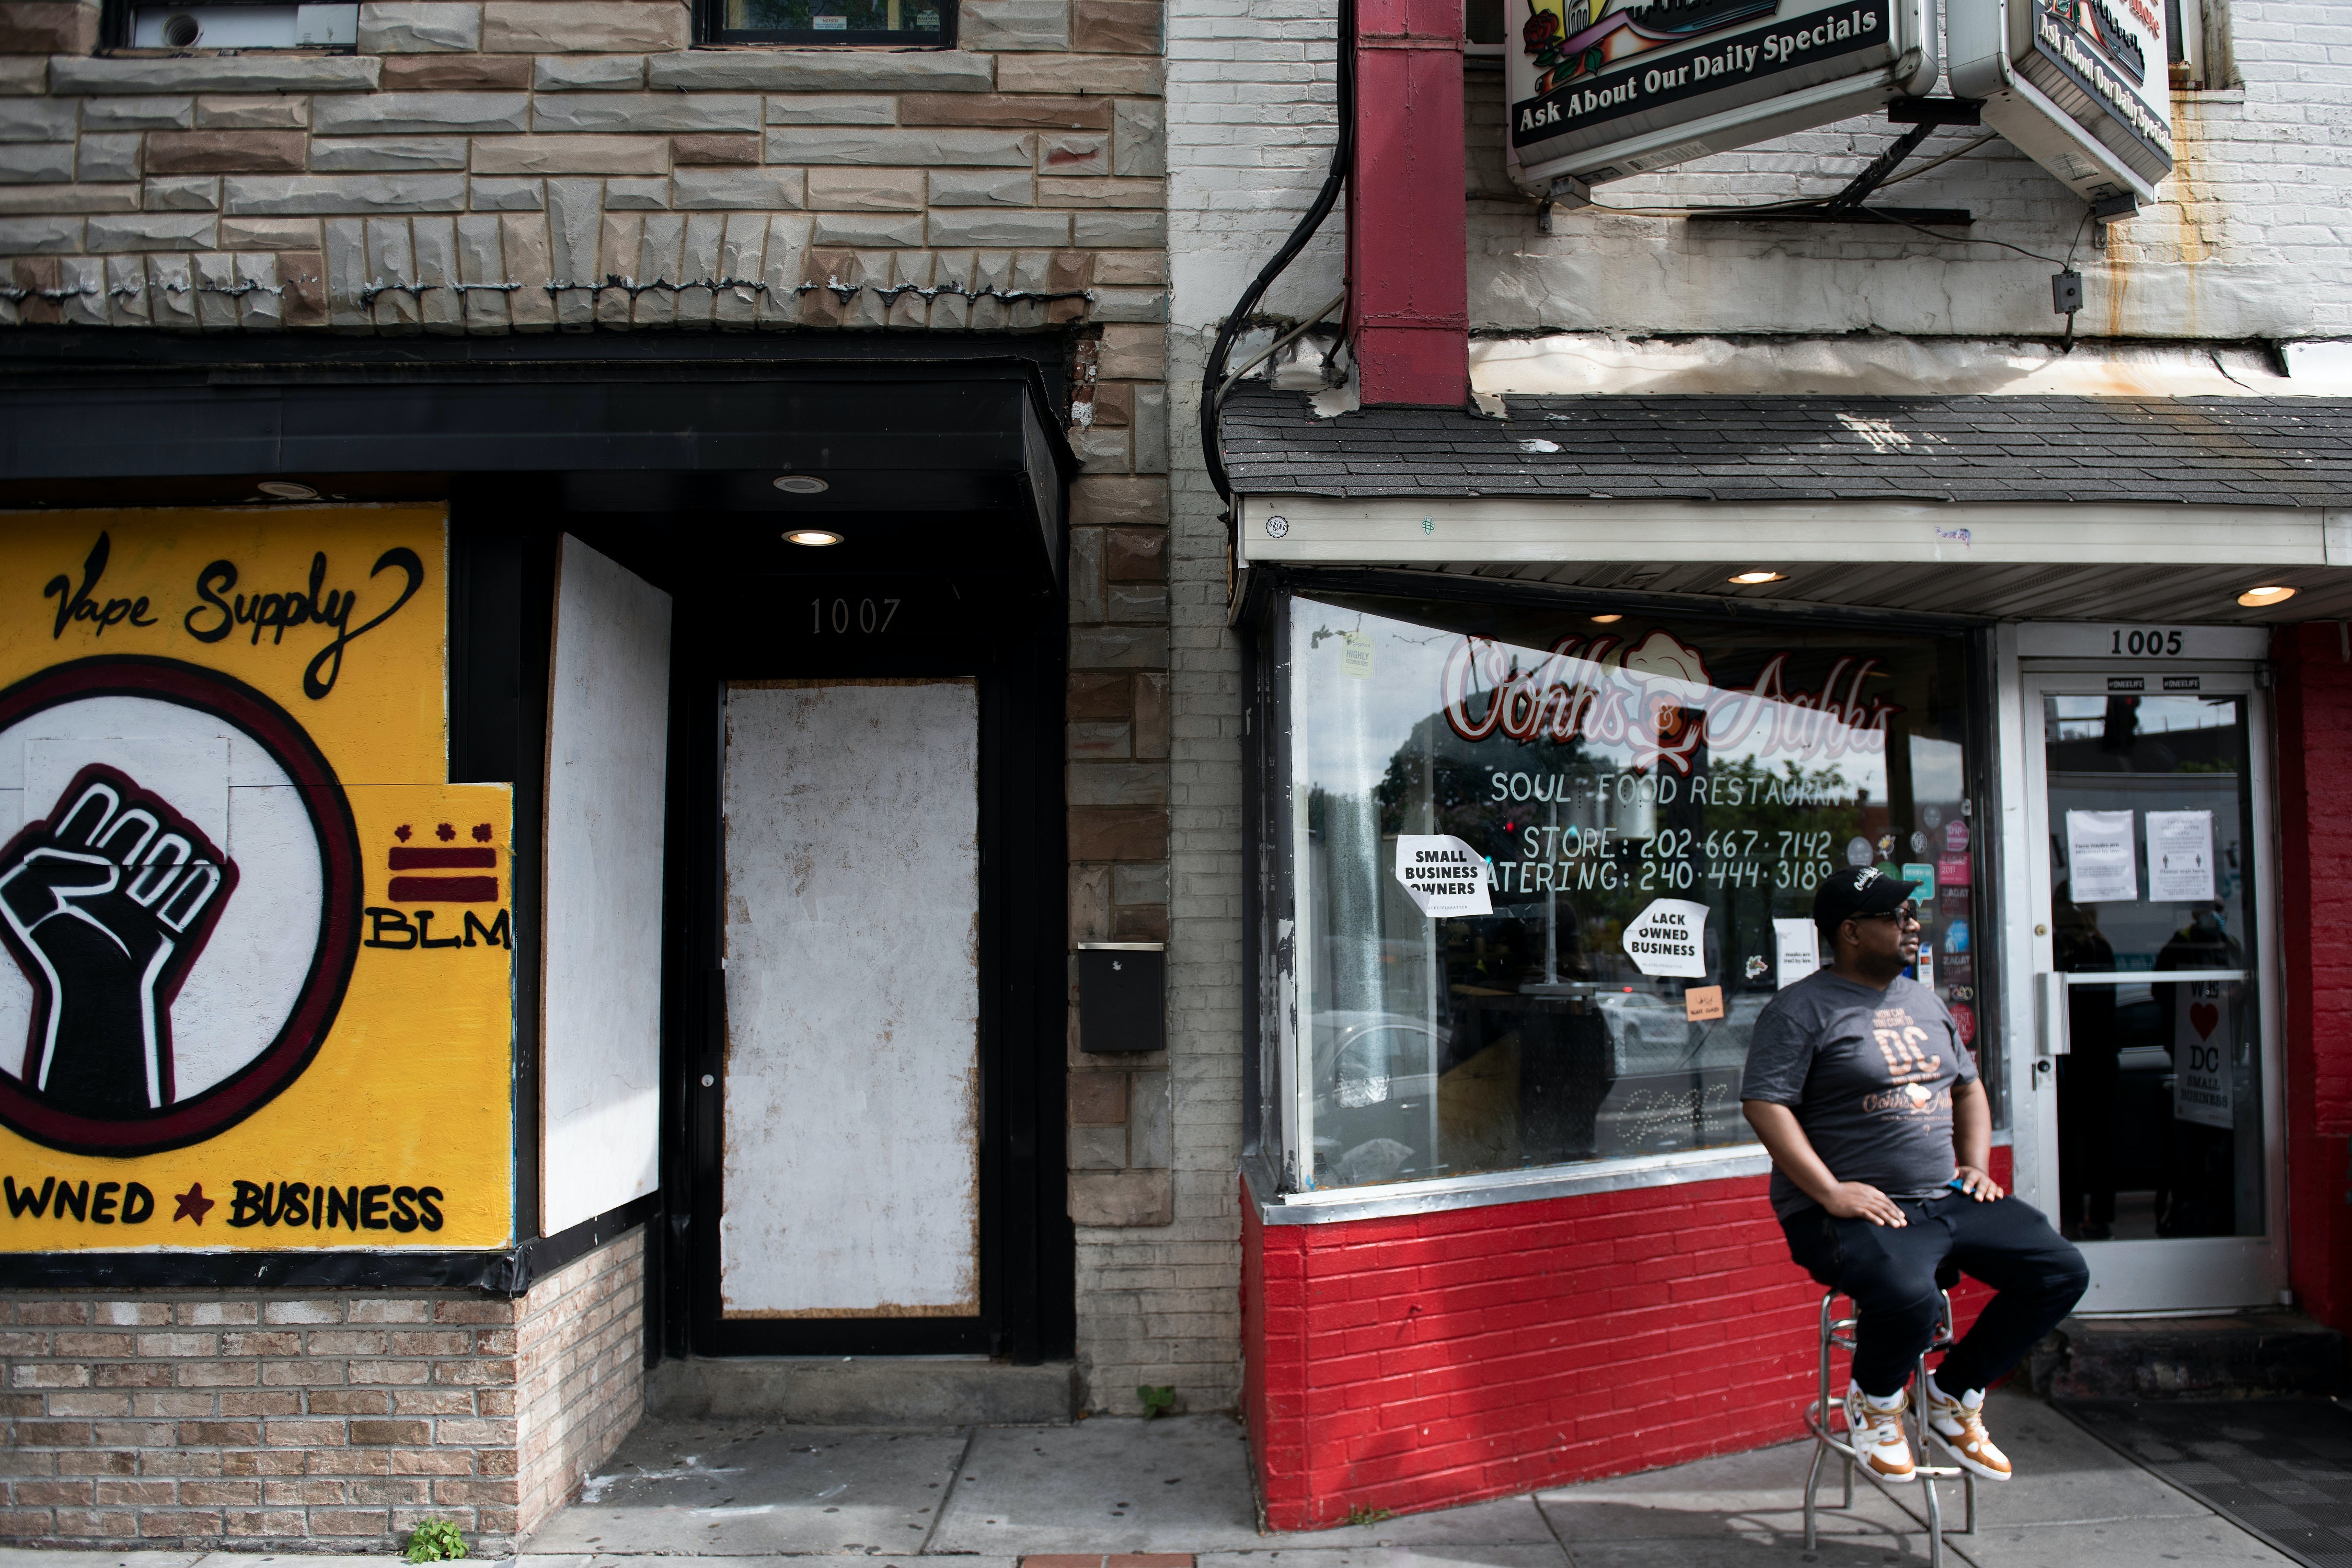 Chef Oji Abbot sits outside his restaurant and another Black-owned business, both of which feature anti-racism messaging